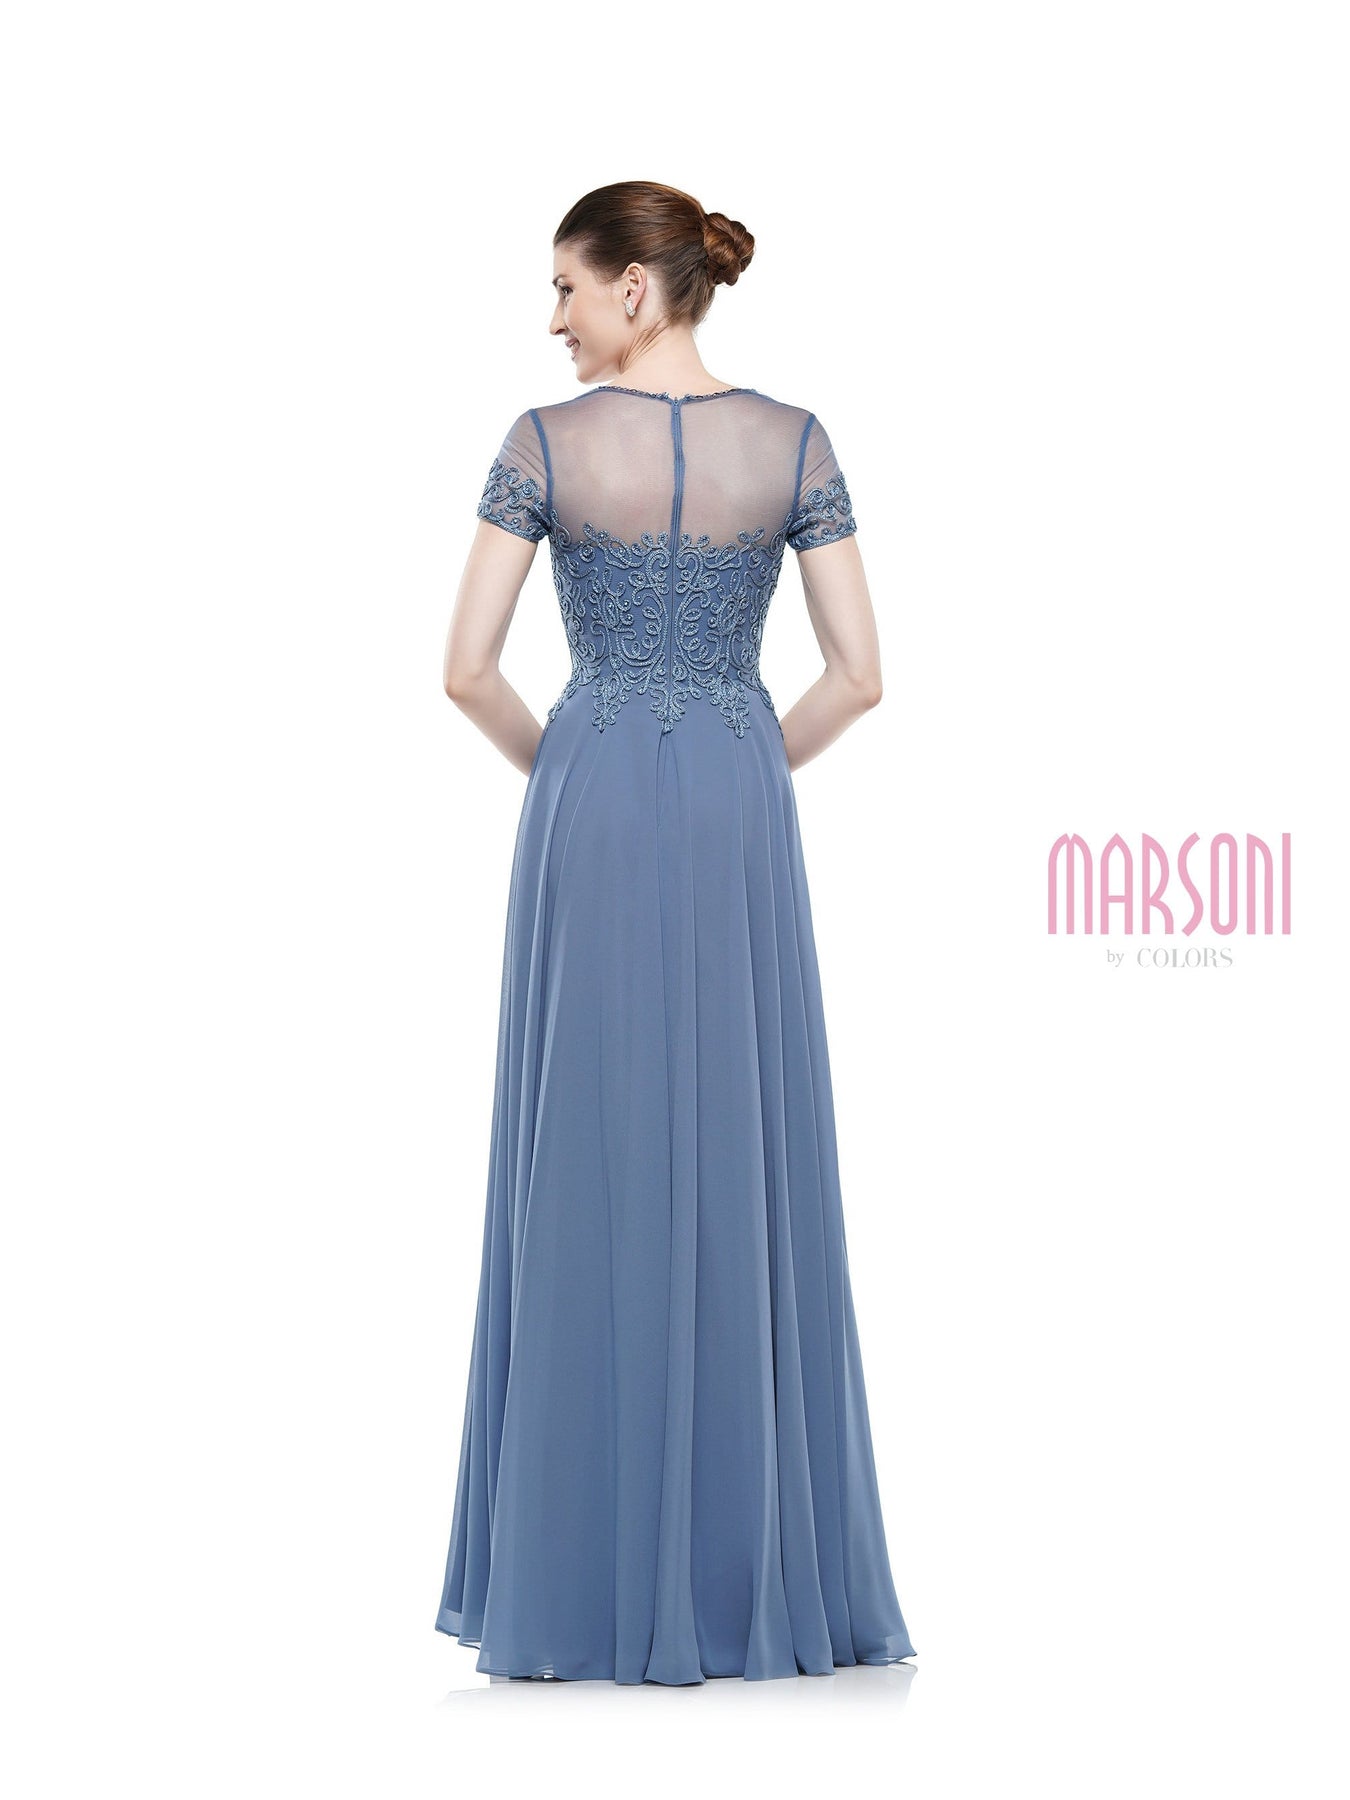 Marsoni by Colors - M271 Short Sleeve Queen Anne Soutache Gown Mother of the Bride Dresses